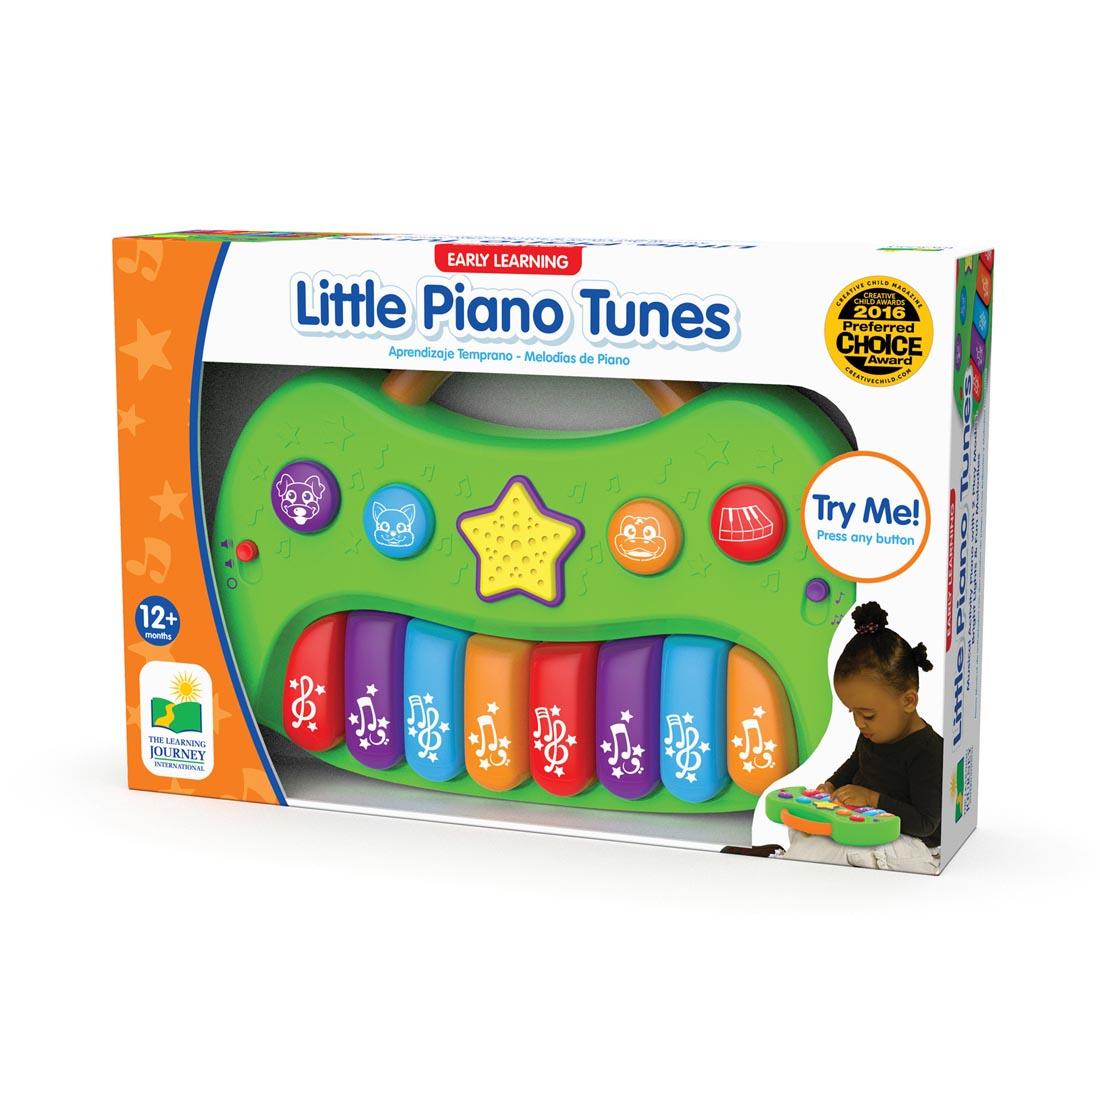 Little Piano Tunes by The Learning Journey